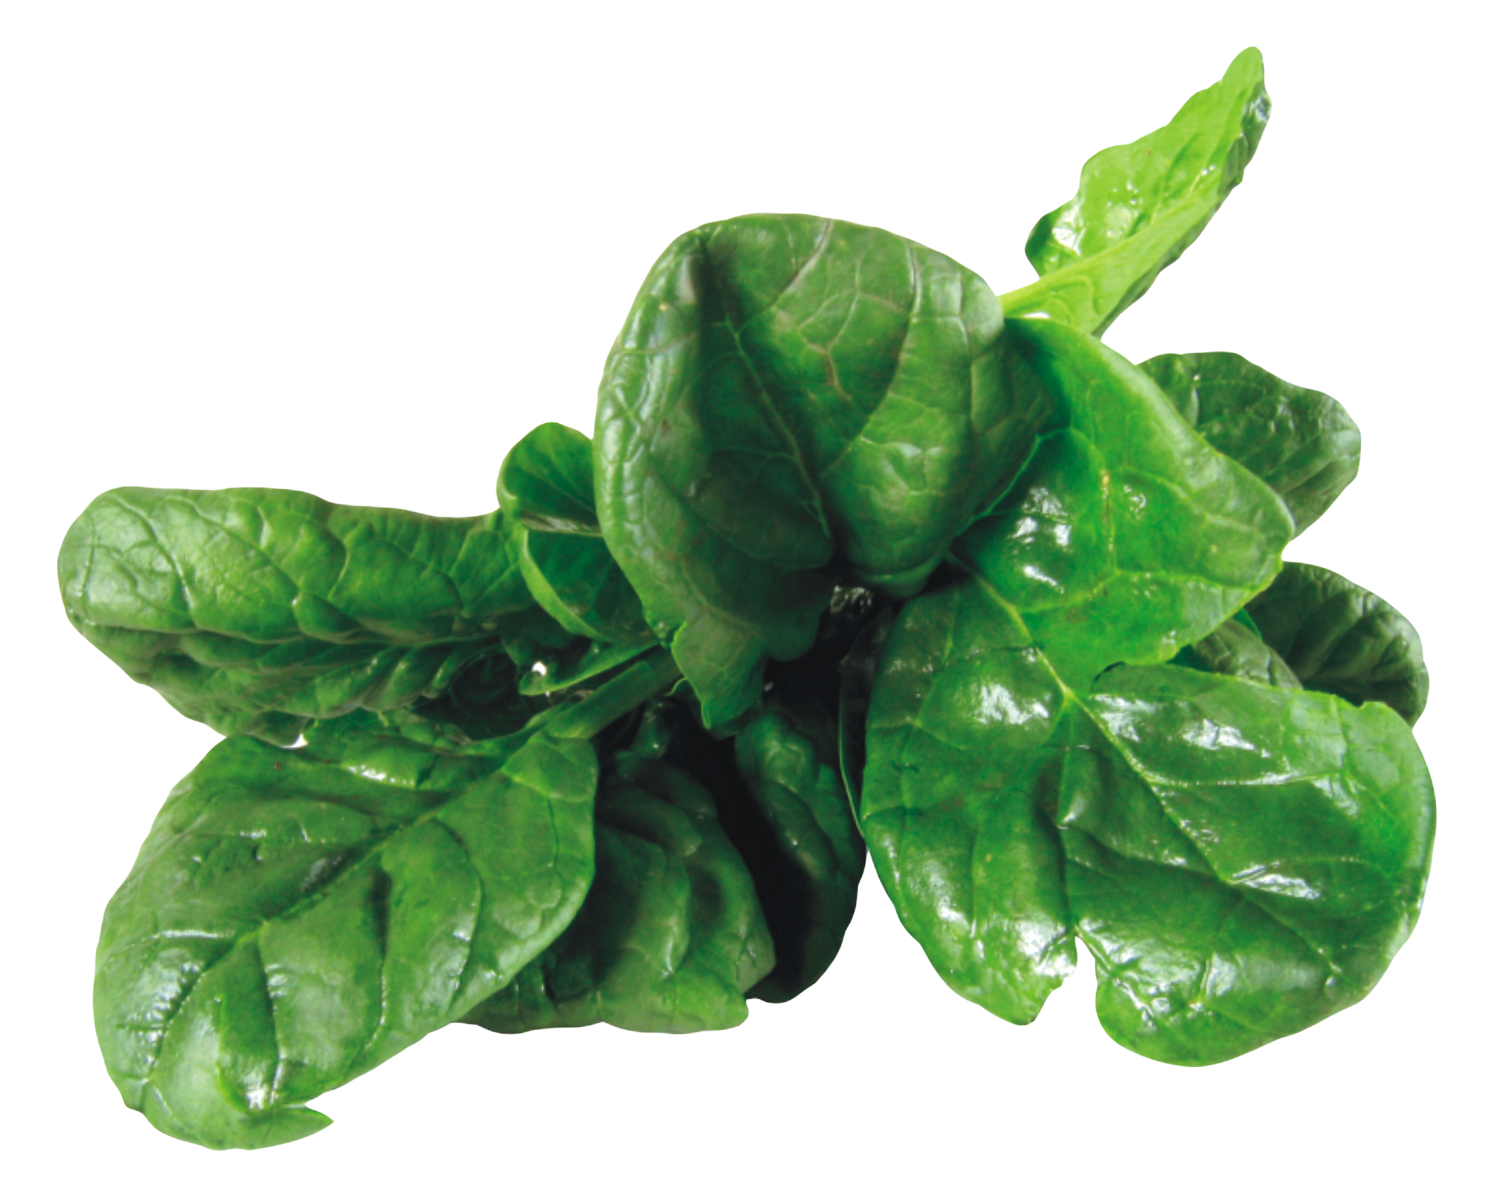 Leaves Green Spinach PNG Free Photo PNG Image